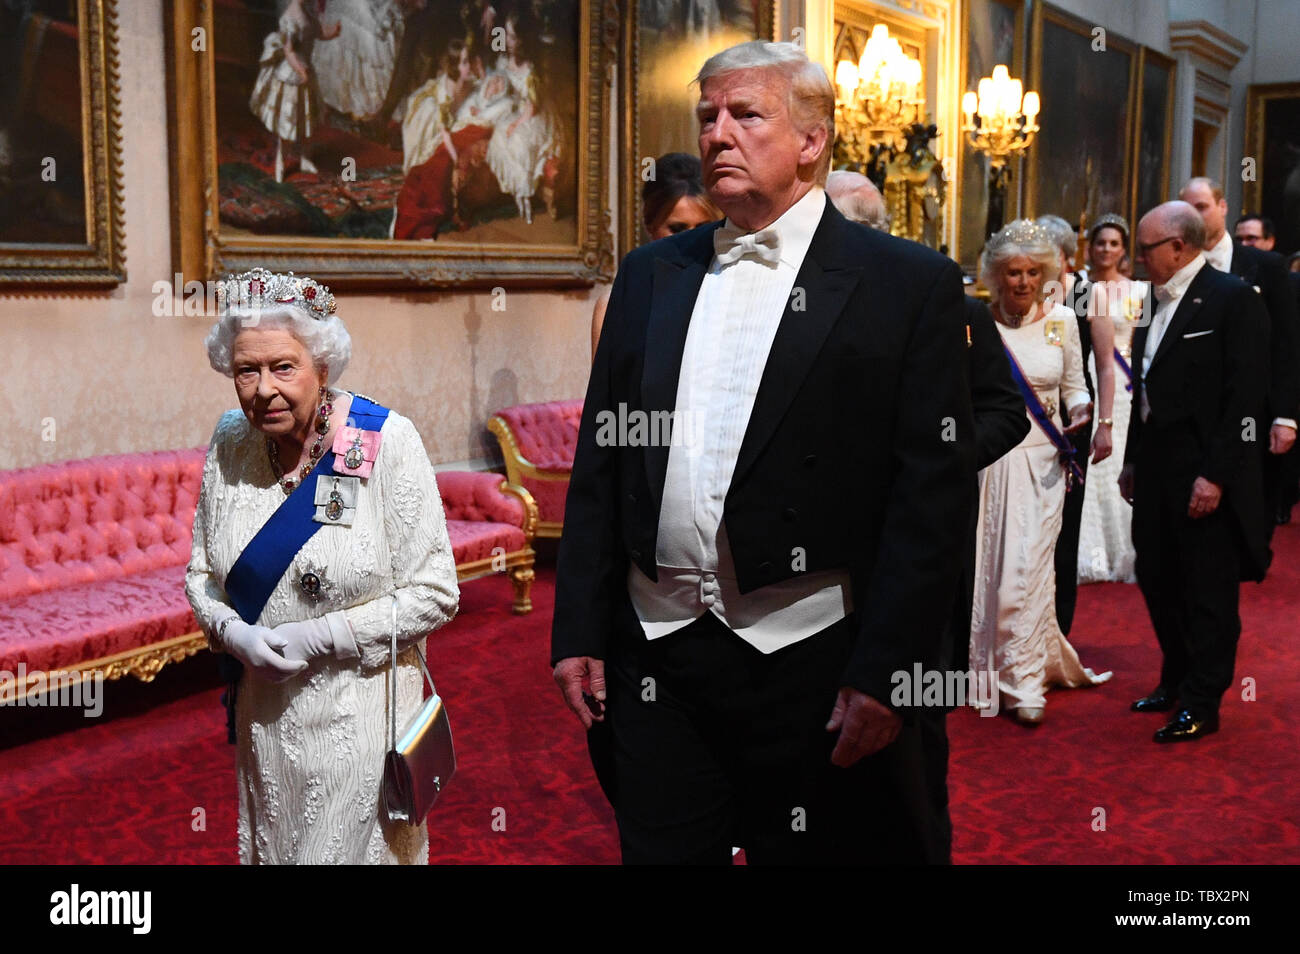 Queen Elizabeth II, US President Donald Trump and the Prince of Wales arrive through the East Gallery during the State Banquet at Buckingham Palace, London, on day one of the US President's three day state visit to the UK. Stock Photo